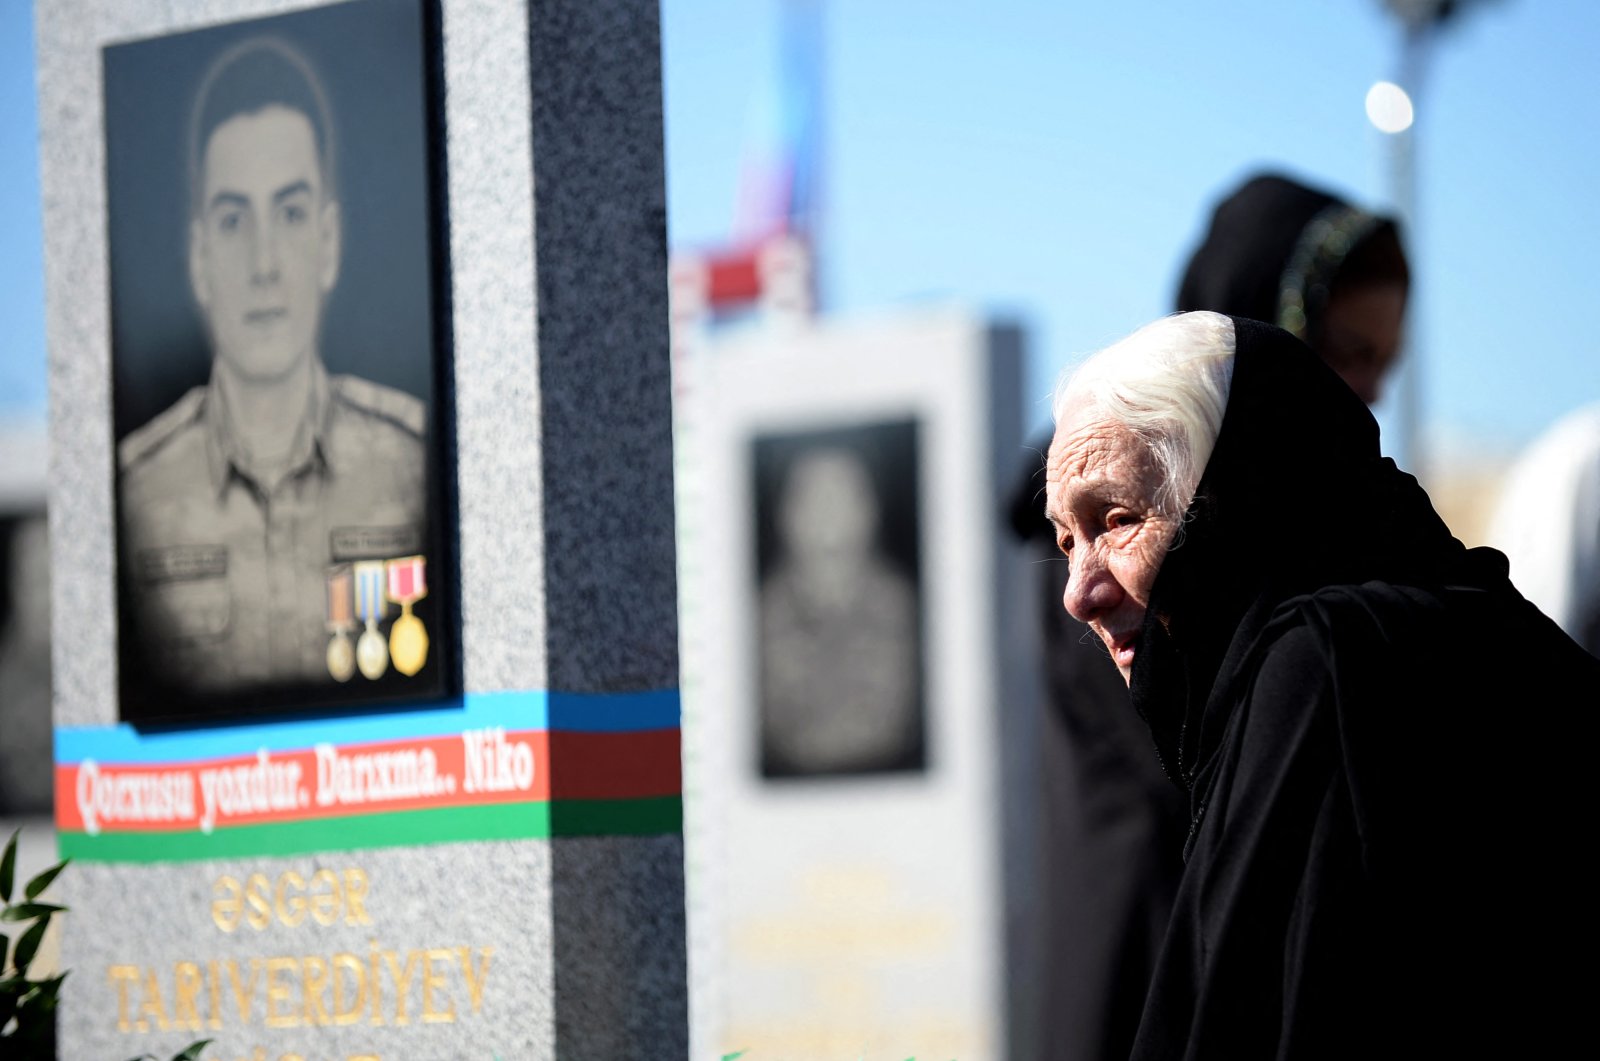 Relatives and friends of soldiers killed in six weeks of fighting for control of the disputed Nagorno-Karabakh region visit a military cemetery in Baku on the second anniversary of the conflict, Azerbaijan, Sept. 27, 2022. (AFP Photo)